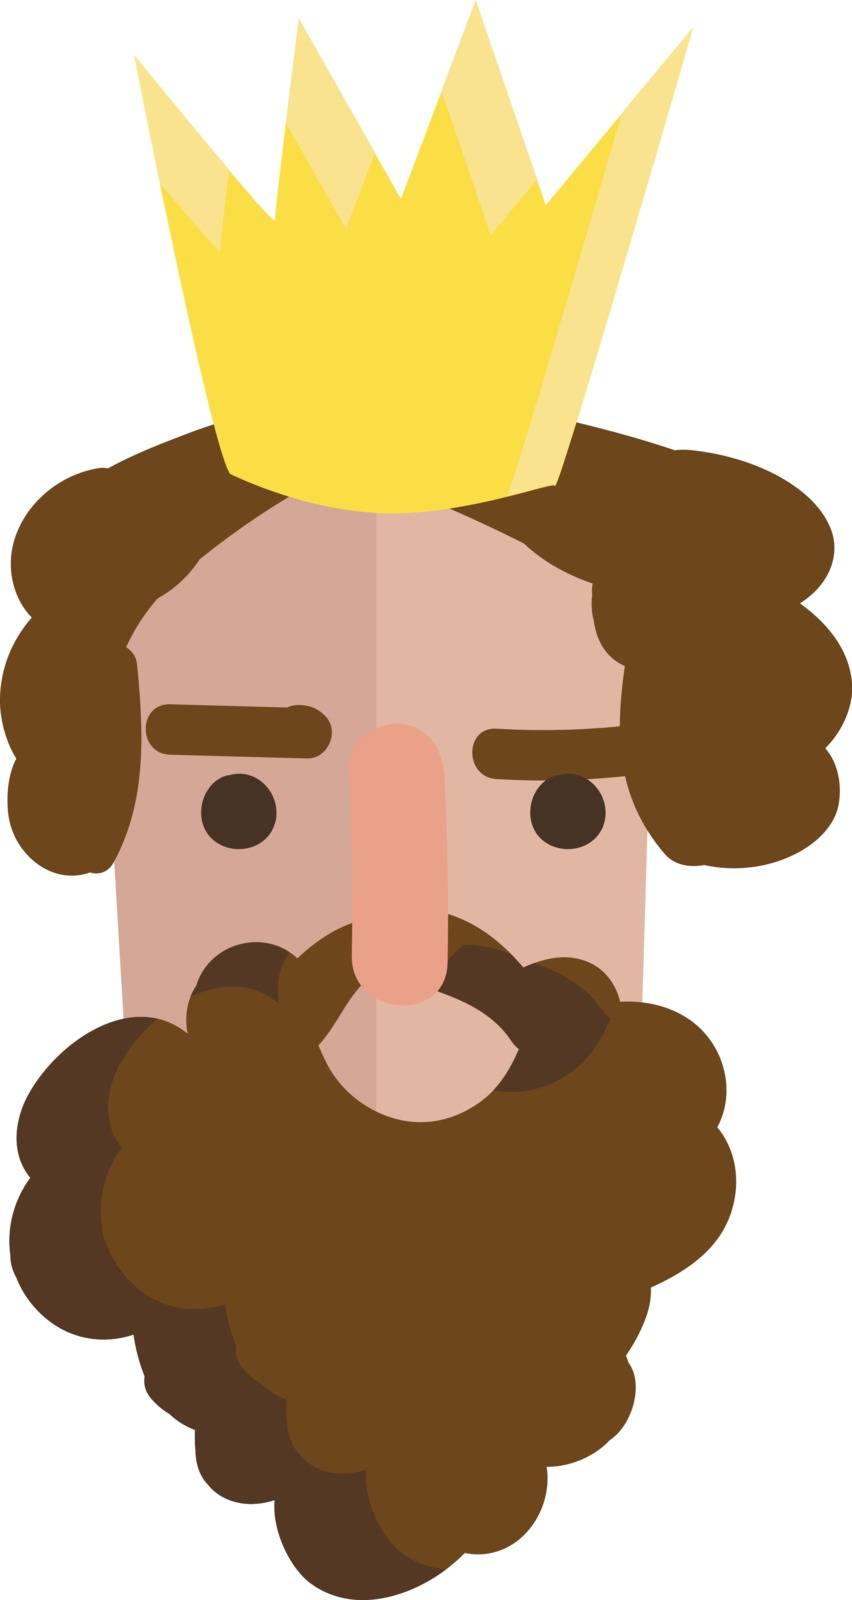 Portrait of a king with mustache and beard and golden crown  vector illustration on white background 